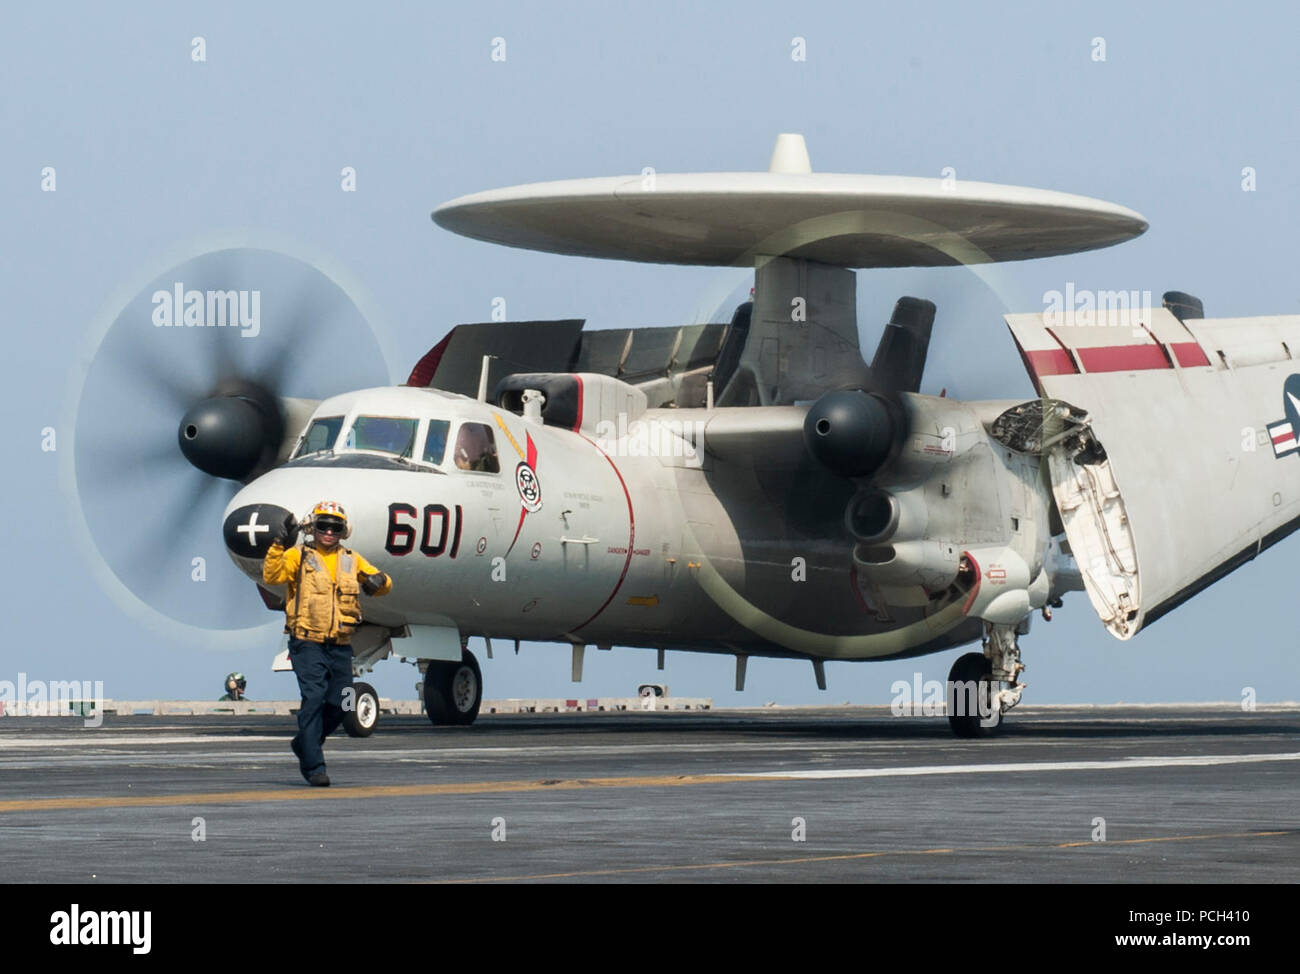 A U.S. Navy E-2C Hawkeye assigned to Carrier Airborne Early Warning Squadron (VAW) 124 taxis on the flight deck of the aircraft carrier USS George H.W. Bush (CVN 77) Sept. 1, 2014, in the Persian Gulf. The George H.W. Bush was supporting maritime security operations and theater security cooperation efforts in the U.S. 5th Fleet area of responsibility. Stock Photo